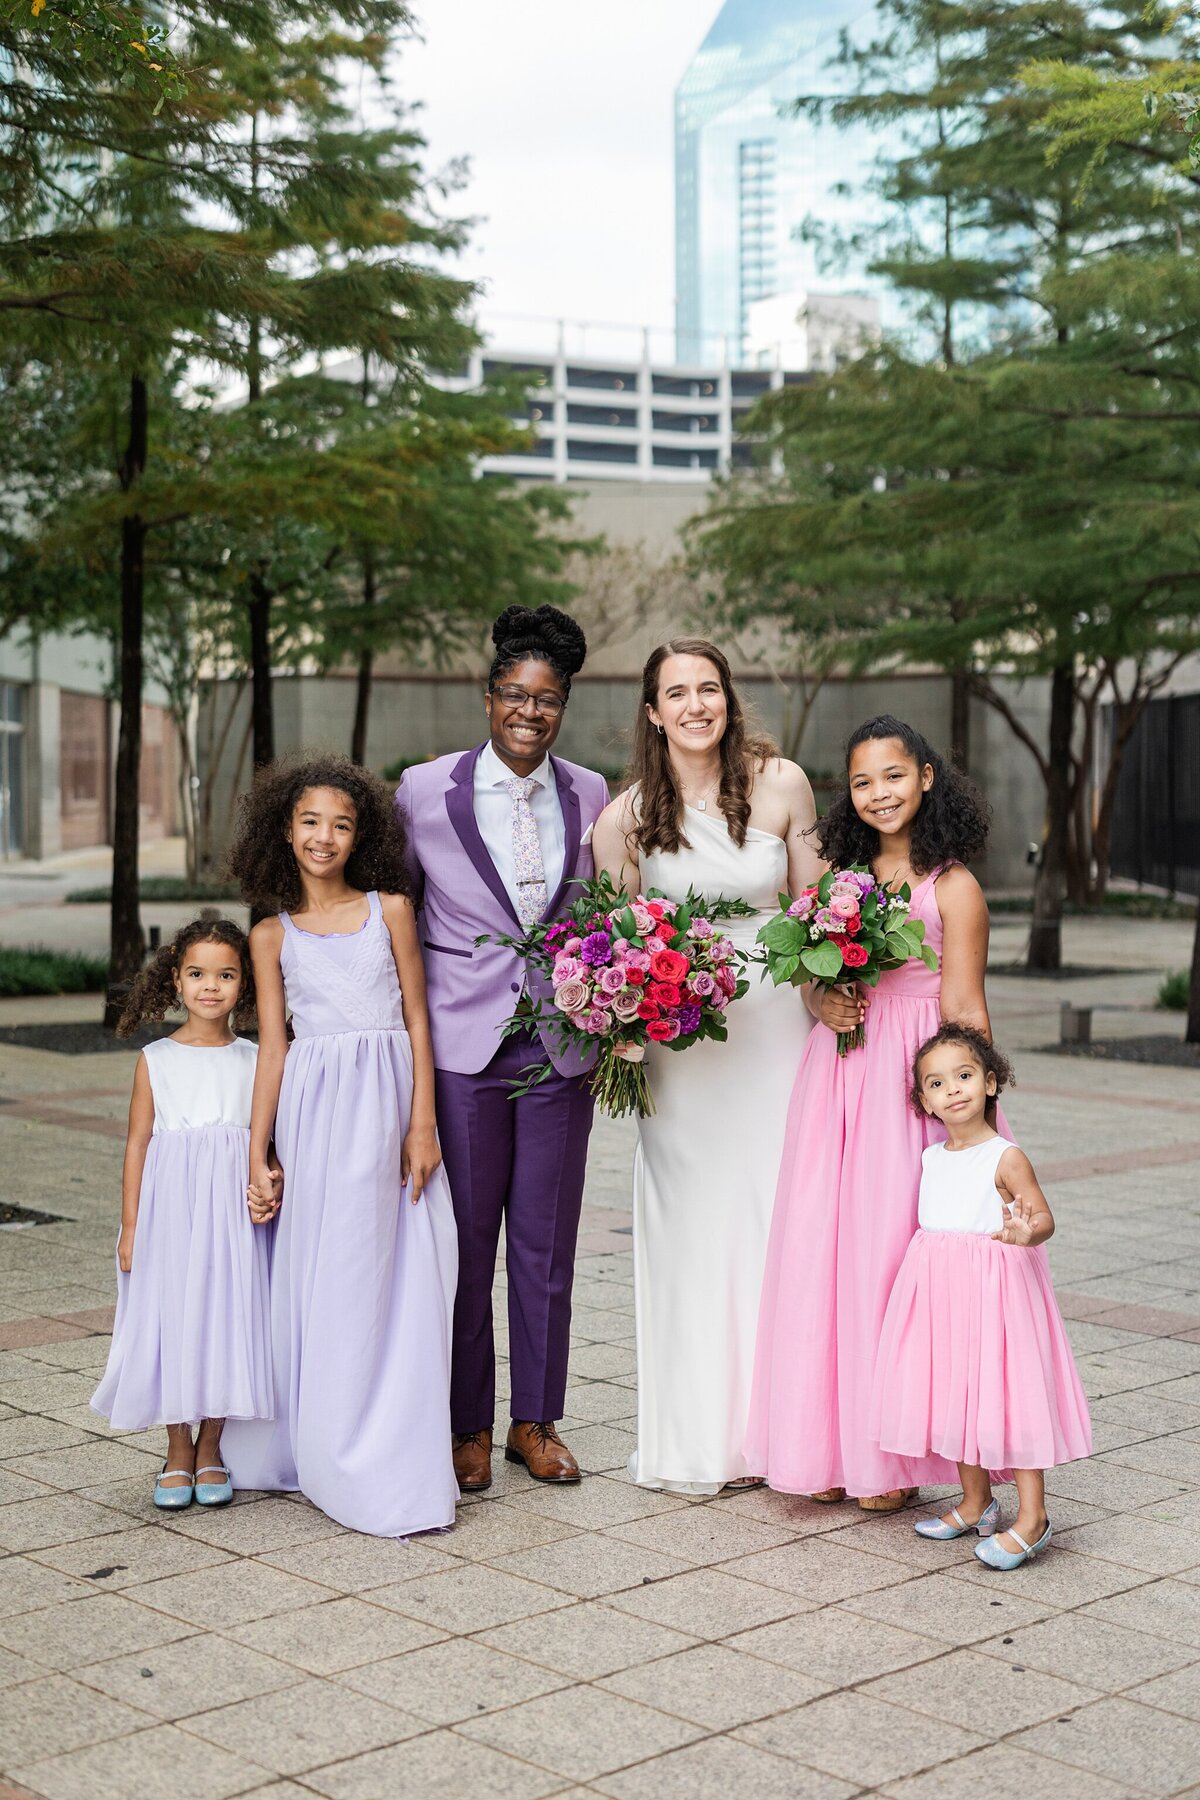 A portrait of two brides and the child attendants from their wedding party after their wedding ceremony at The Westin Dallas Downtown in Dallas, Texas. The bride on the left is wearing a purple suit with a floral tie and her two child attendants are wearing lavender dresses. The bride on the right is wearing a sleeveless, elegant, white dress with a large bouquet, and her child attendants are wearing pink dresses.